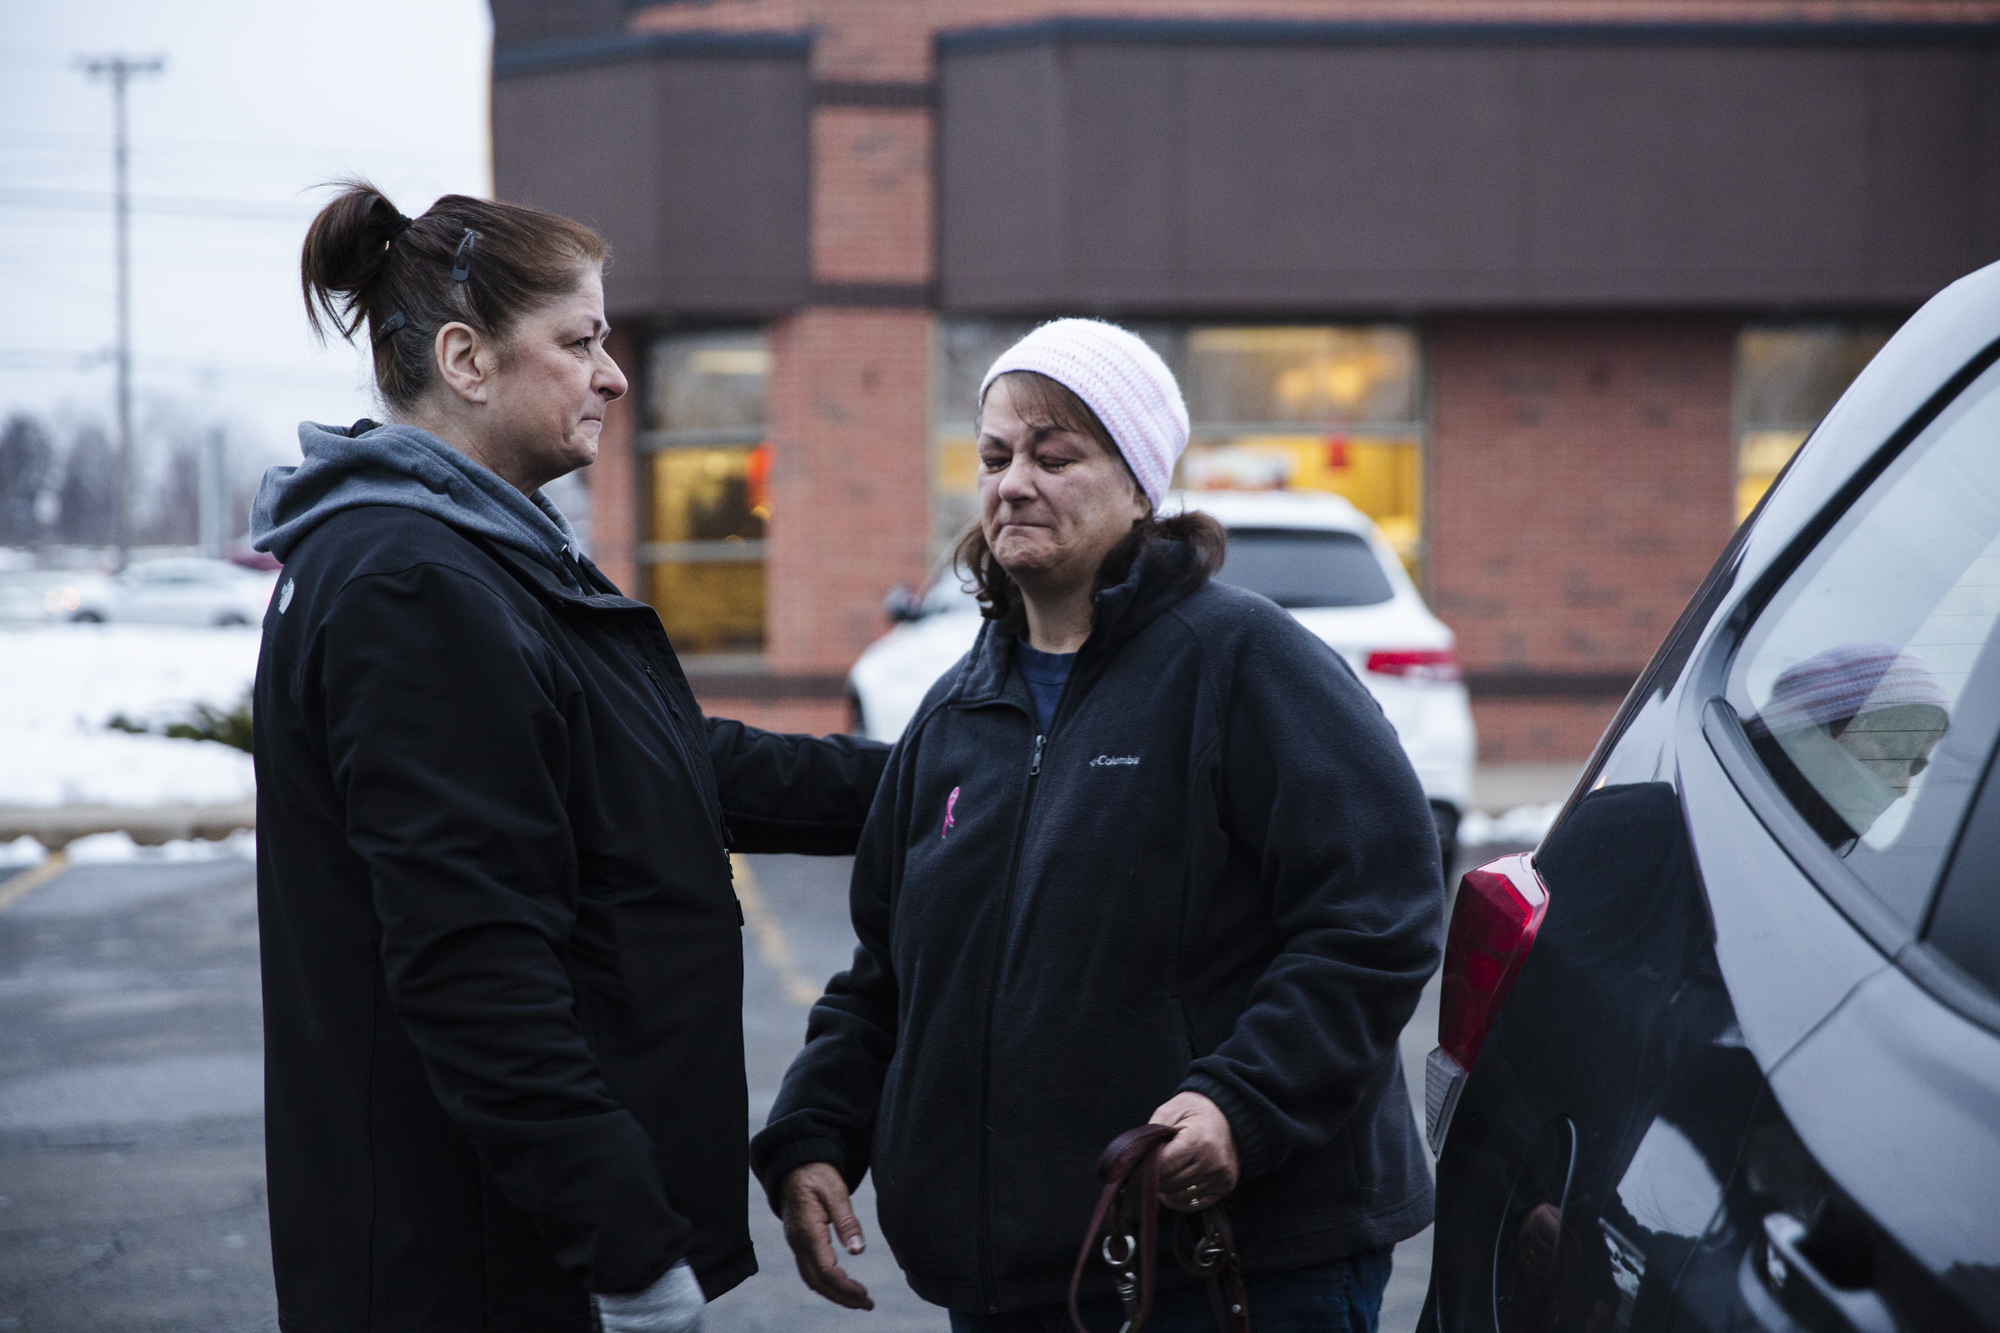  Cindy (right) and her sister (left) after saying goodbye to Brody in a Tim Horton's parking lot outside Rochester, NY, Dec 1, 2018. Cindy won't raise another dog for Guiding Eyes as her cancer, which had been in remission, has returned. Cindy had fe